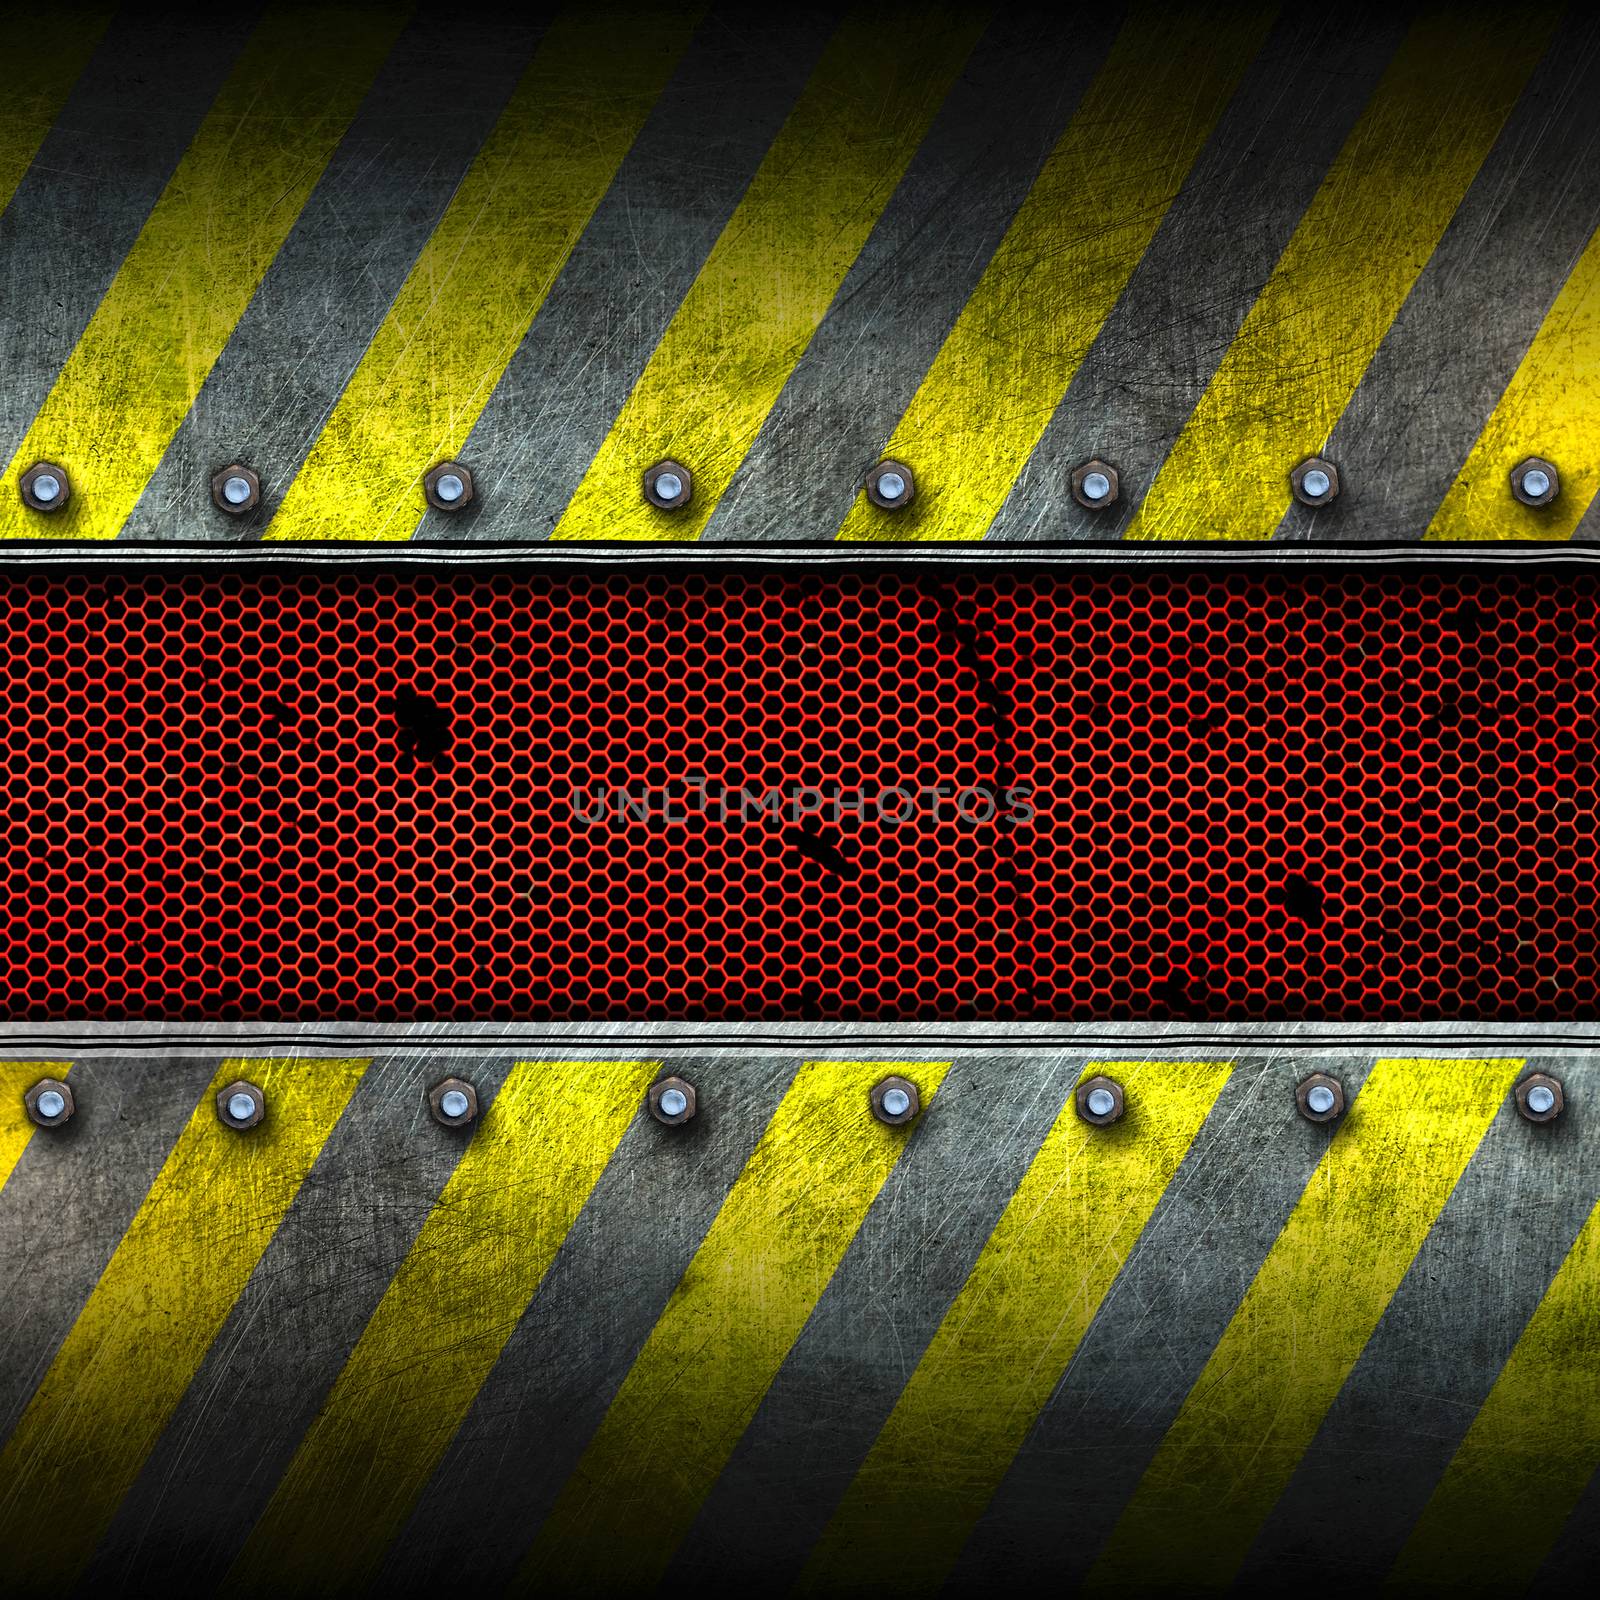 grunge metal and red mesh with yellow painted. safey zone.  by Tanayus